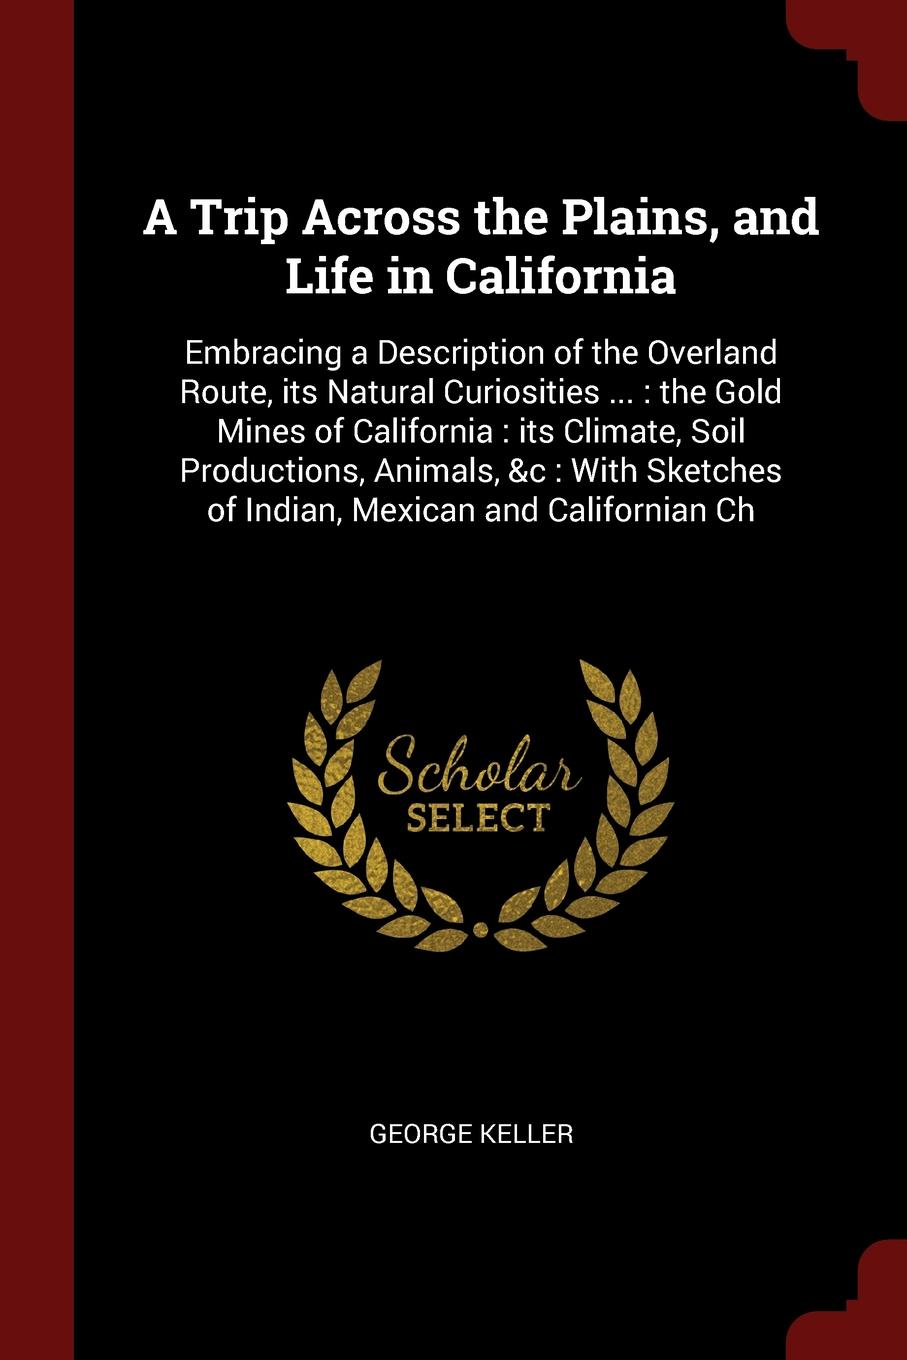 A Trip Across the Plains, and Life in California. Embracing a Description of the Overland Route, its Natural Curiosities ... : the Gold Mines of California : its Climate, Soil Productions, Animals, &c : With Sketches of Indian, Mexican and Califor...